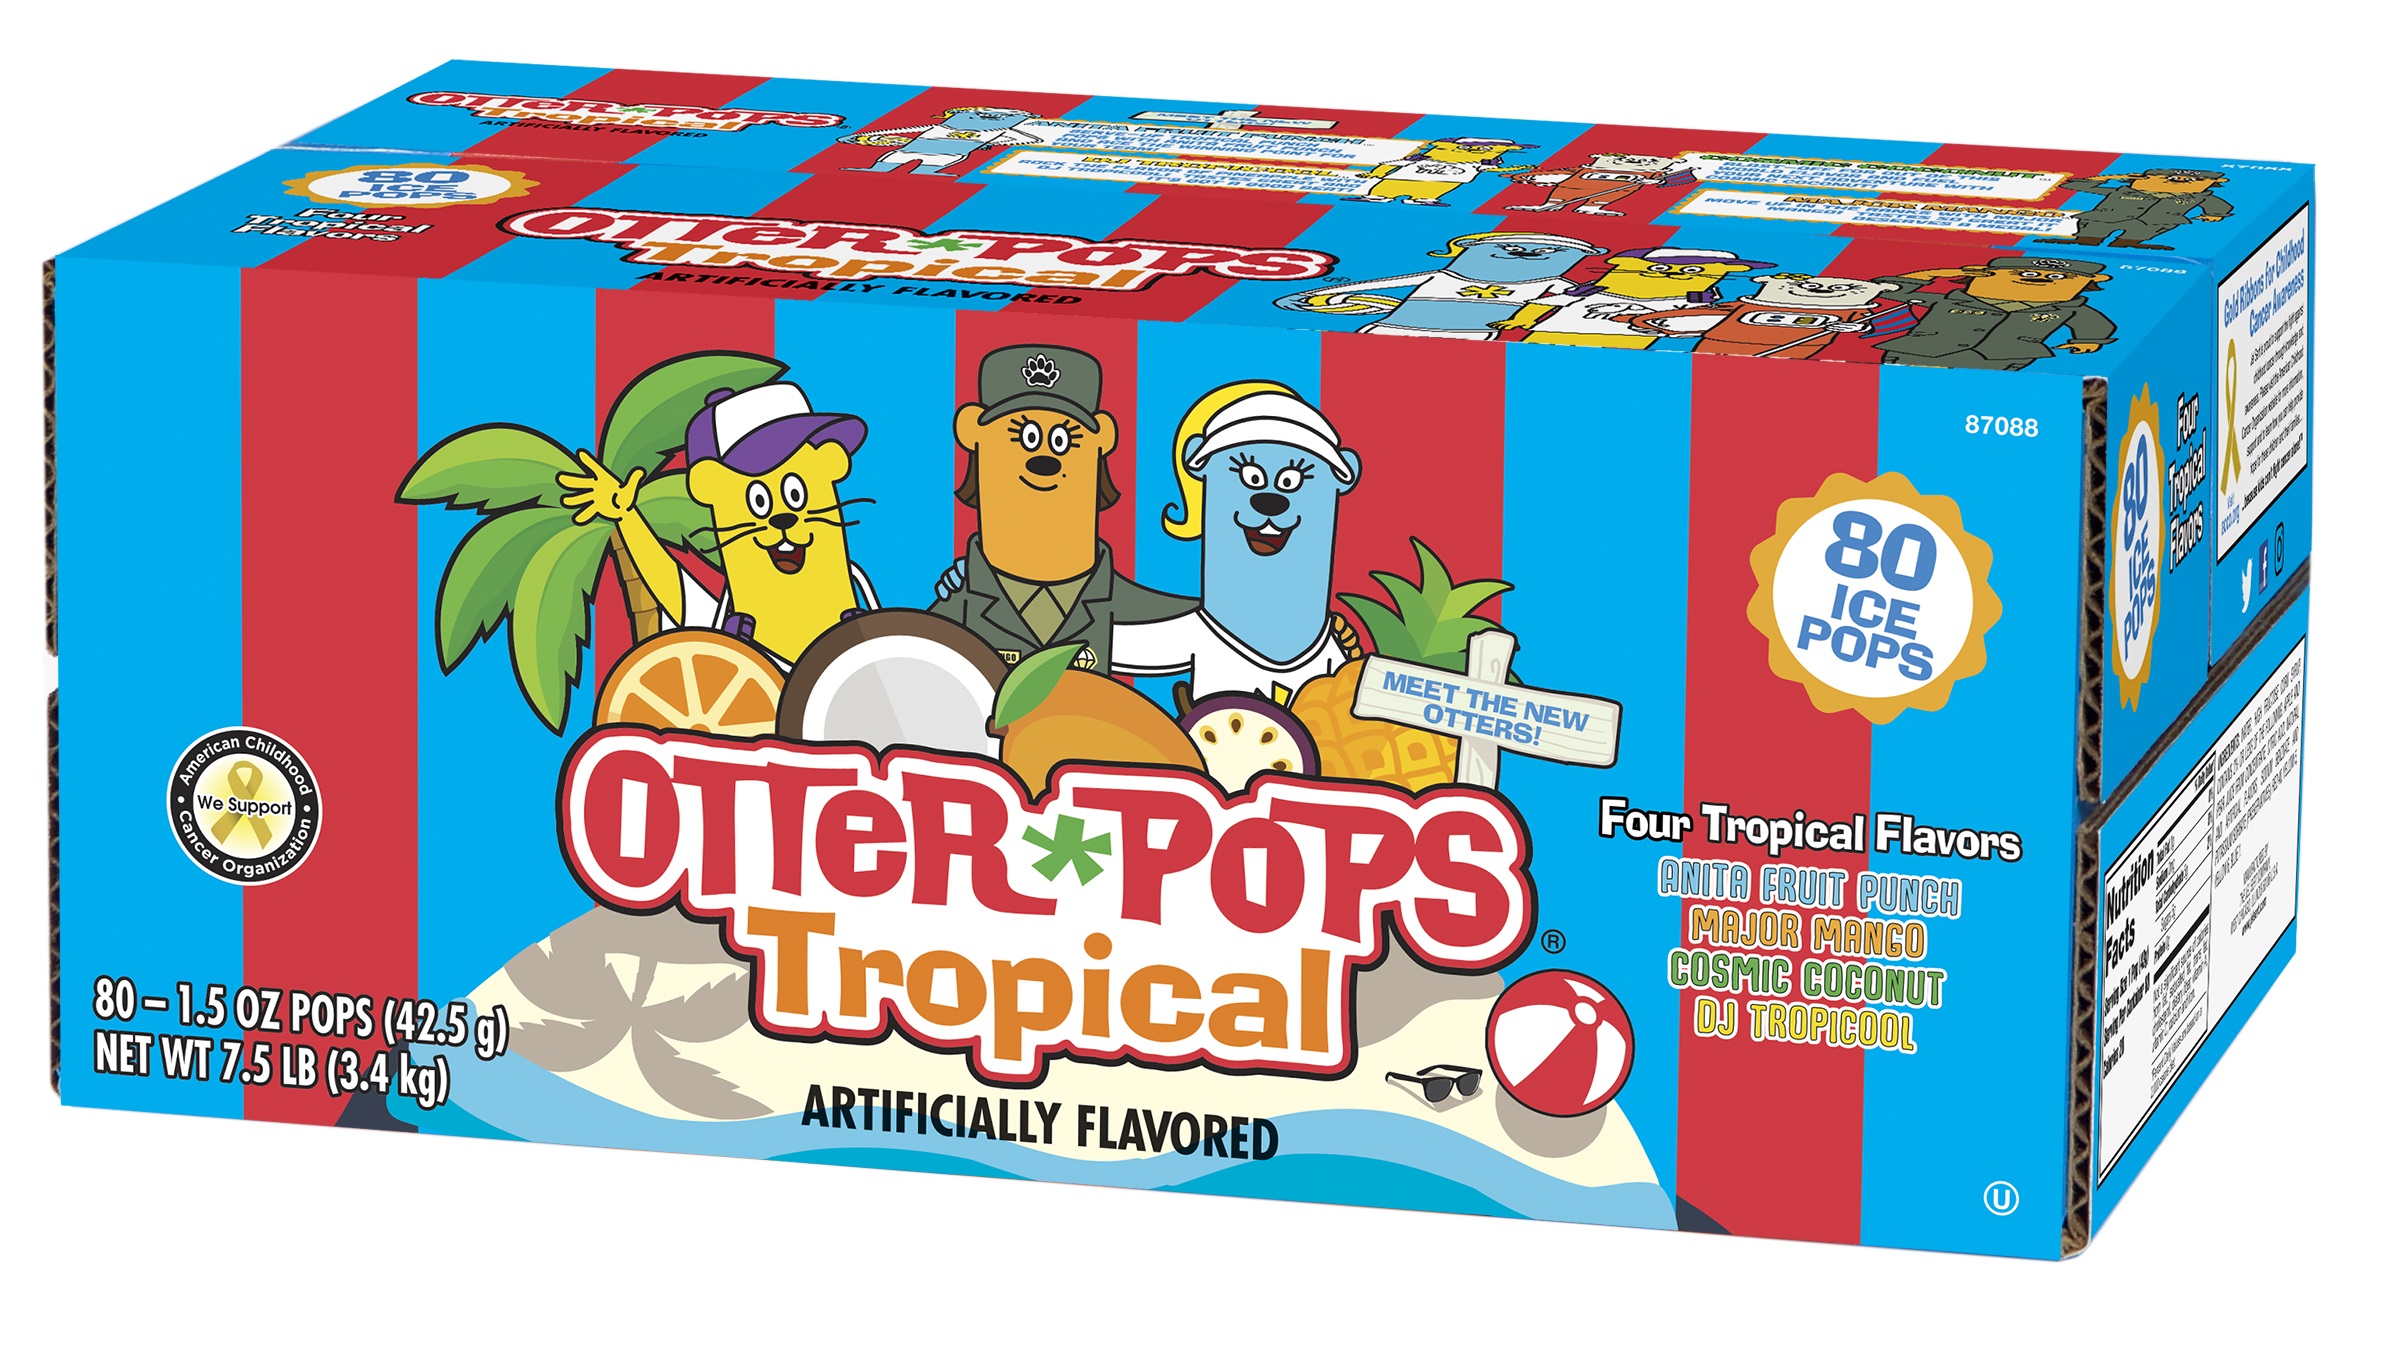 Otter Pops Tropical Delicious Freezer Bars, 1.5 Oz., 80 Count - image 1 of 6